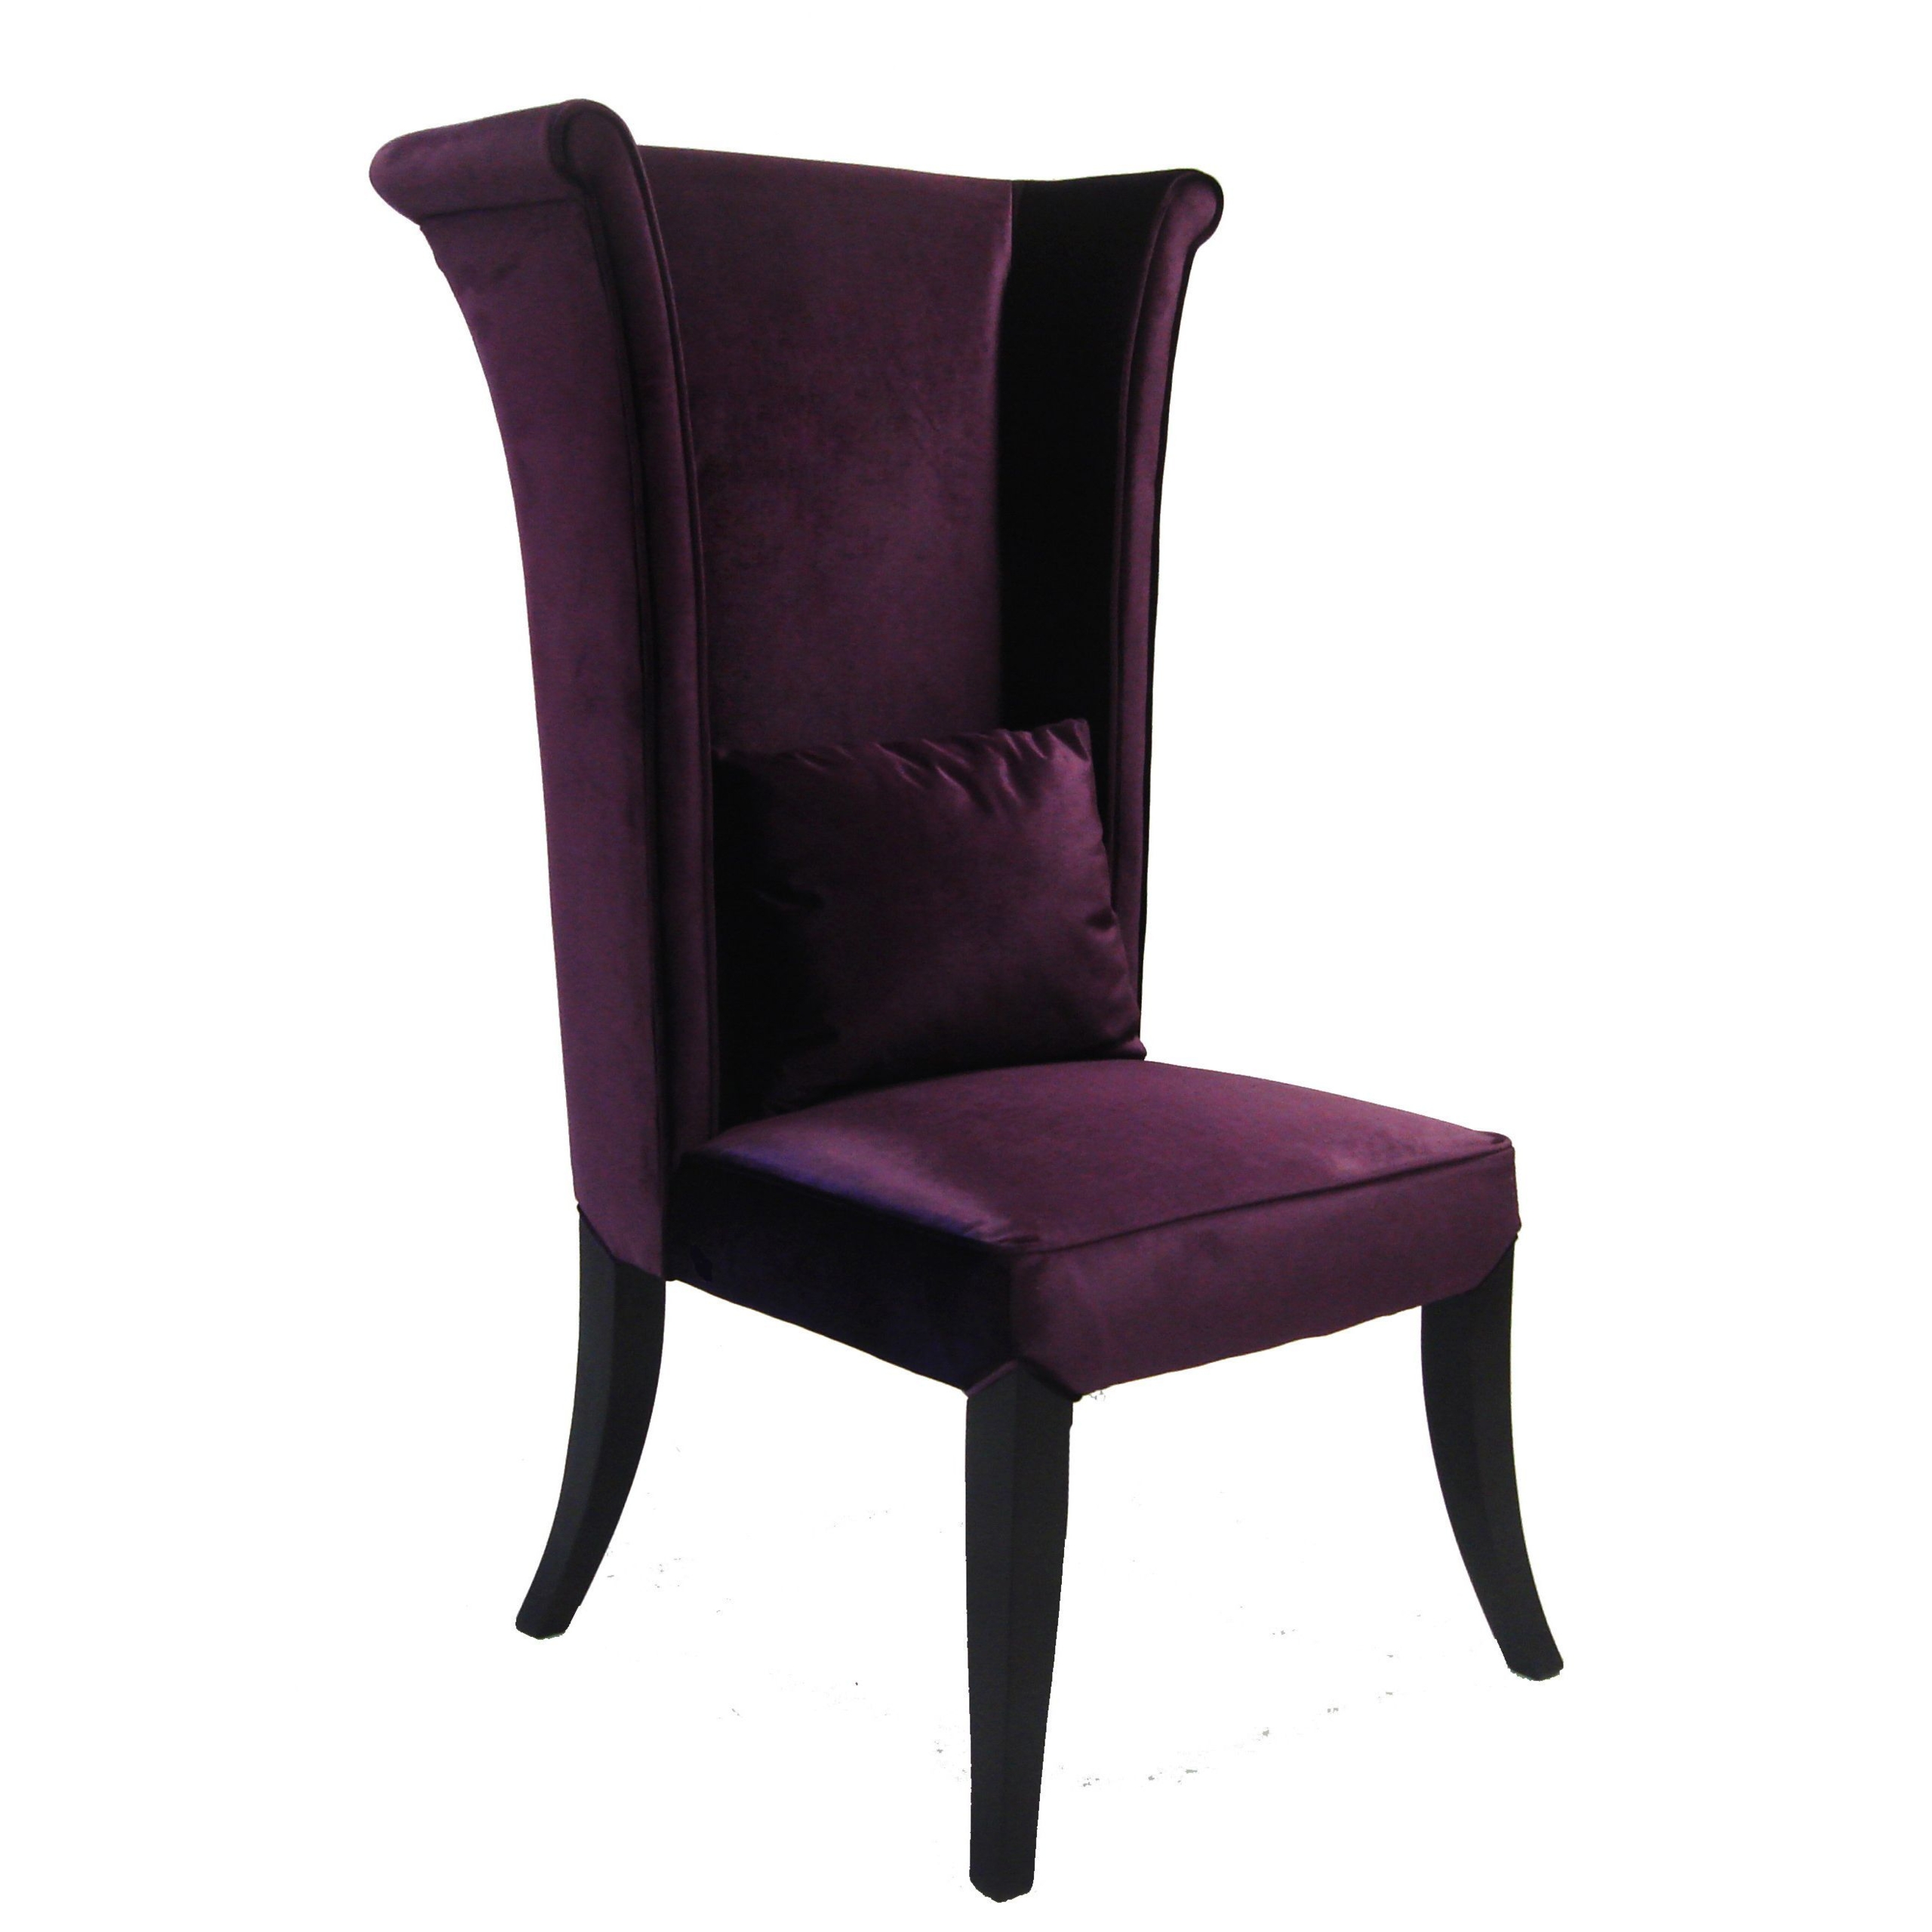 Mad hatter dining chair rich purple velvet lc847sipu